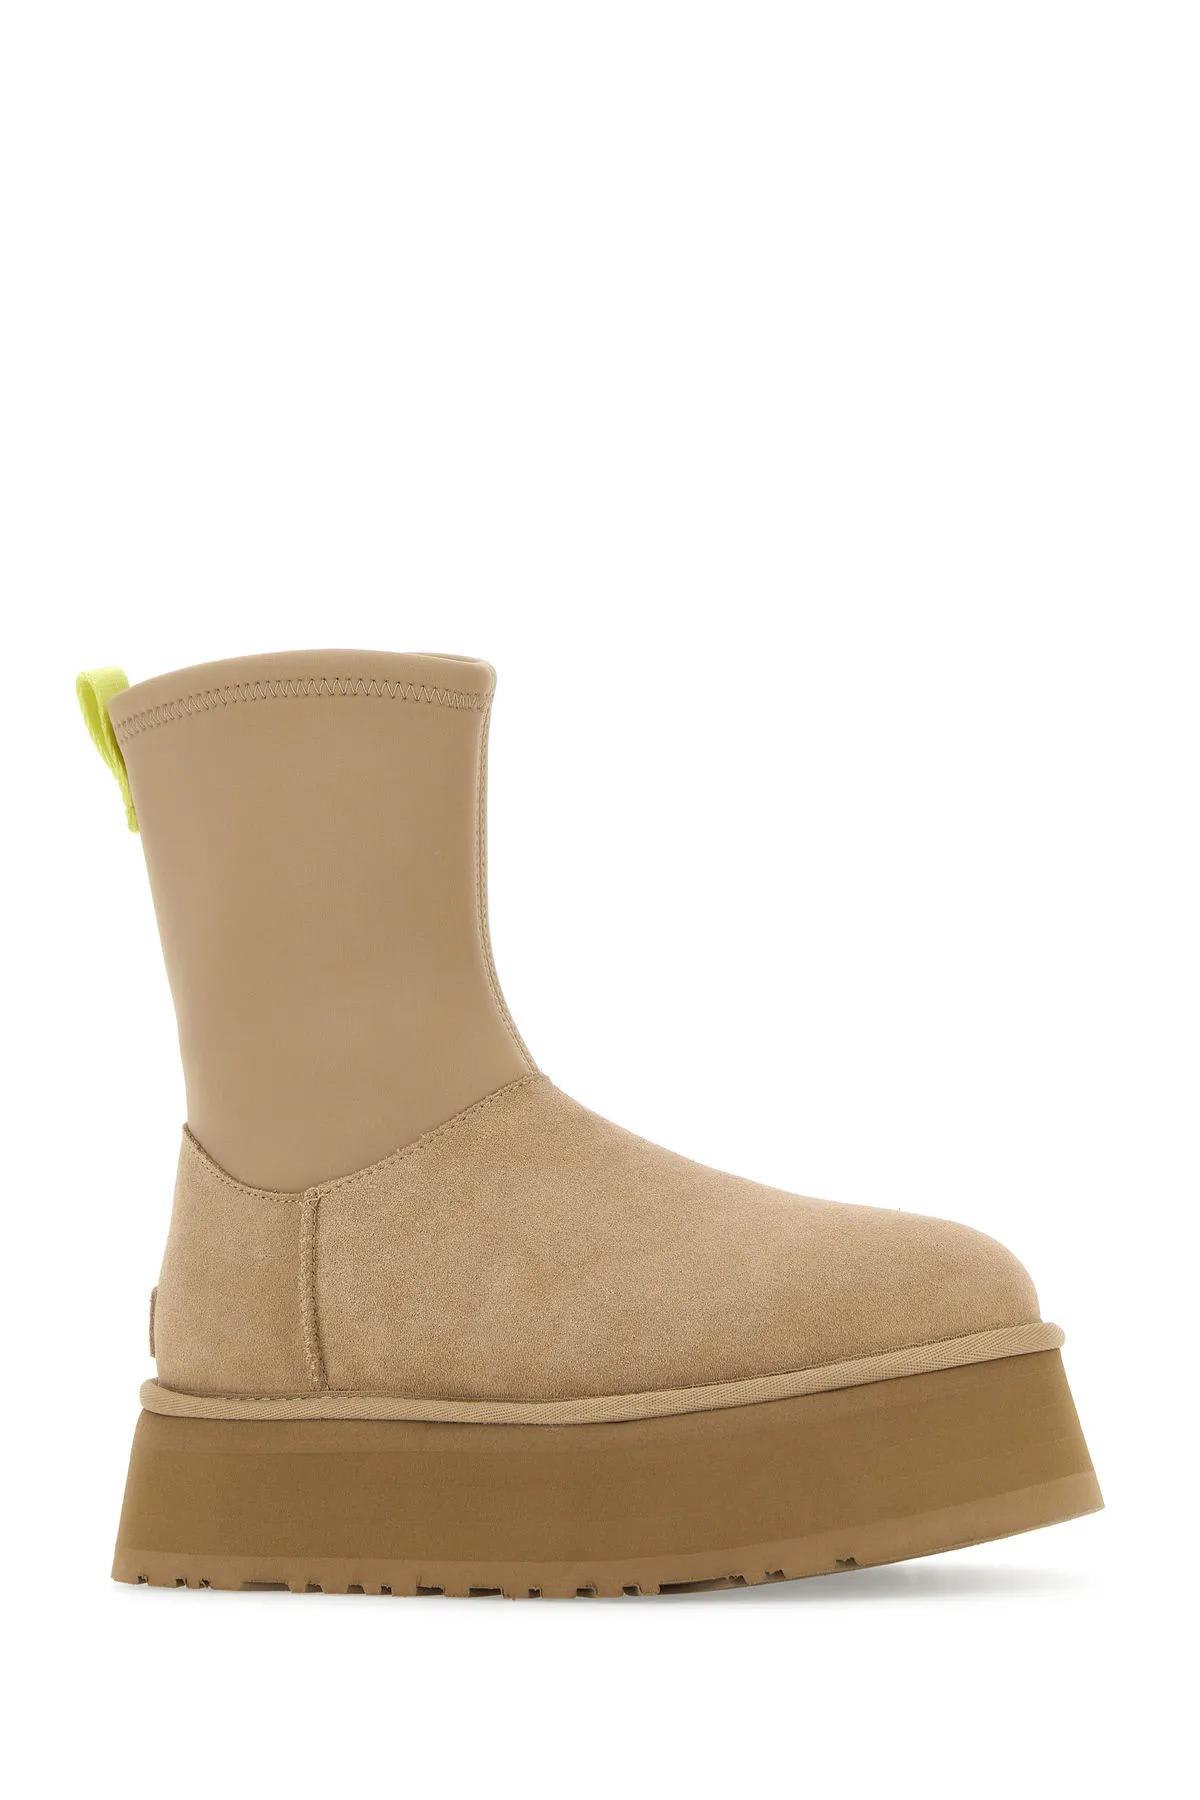 Shop Ugg Sand Suede And Fabric Classic Dipper Ankle Boots In San Sand